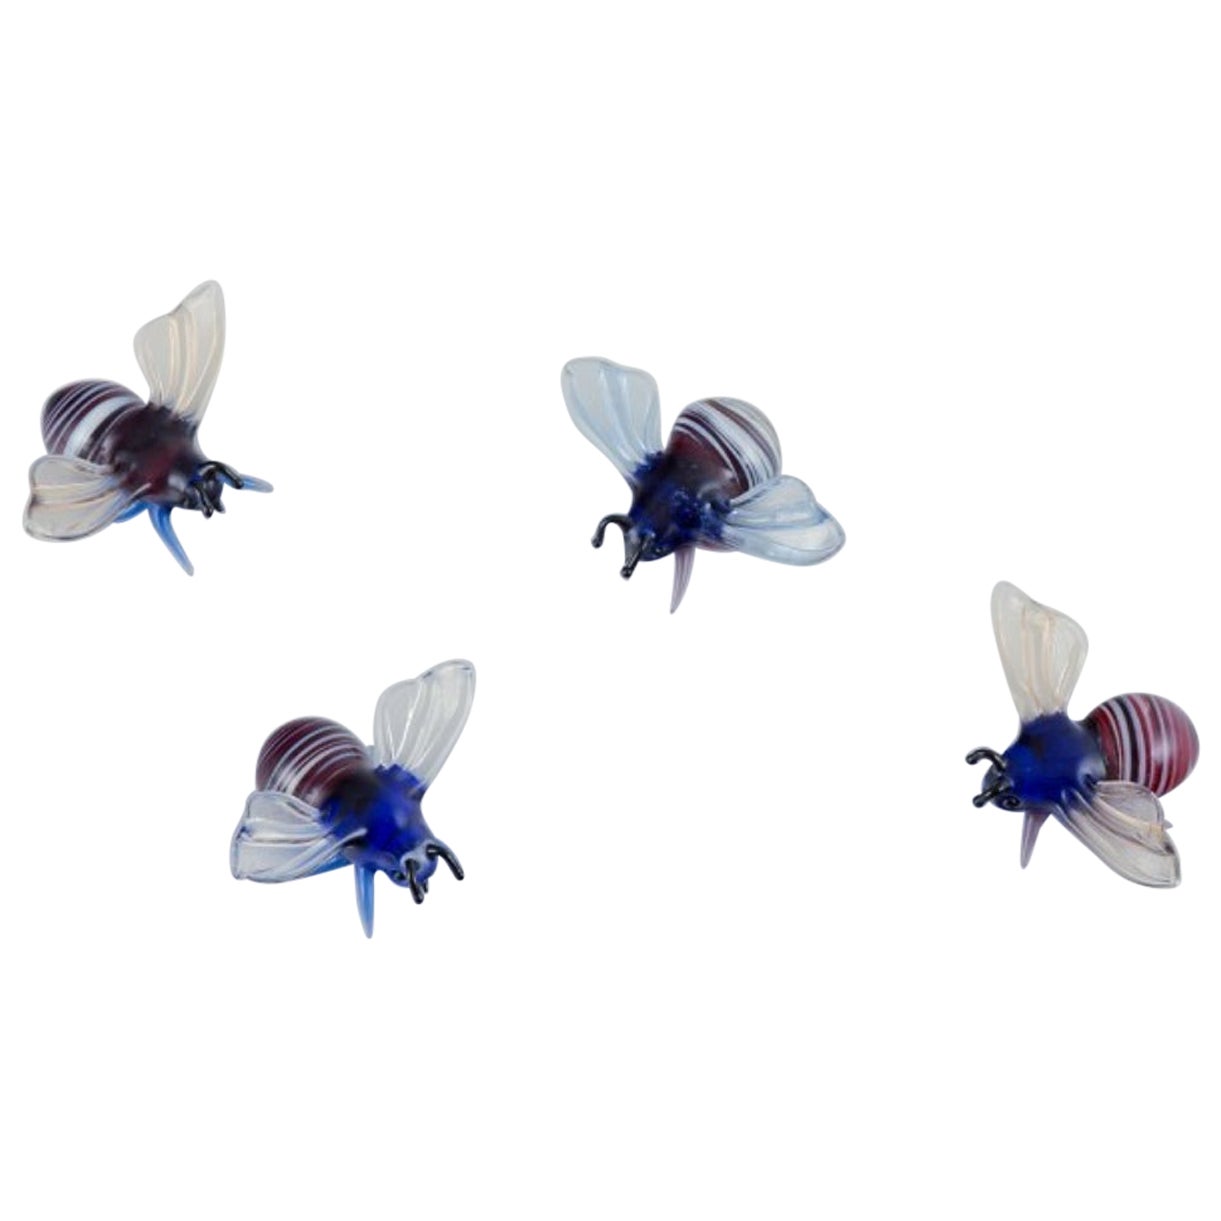 Murano, Italy. A collection of four miniature glass figurines of bees.